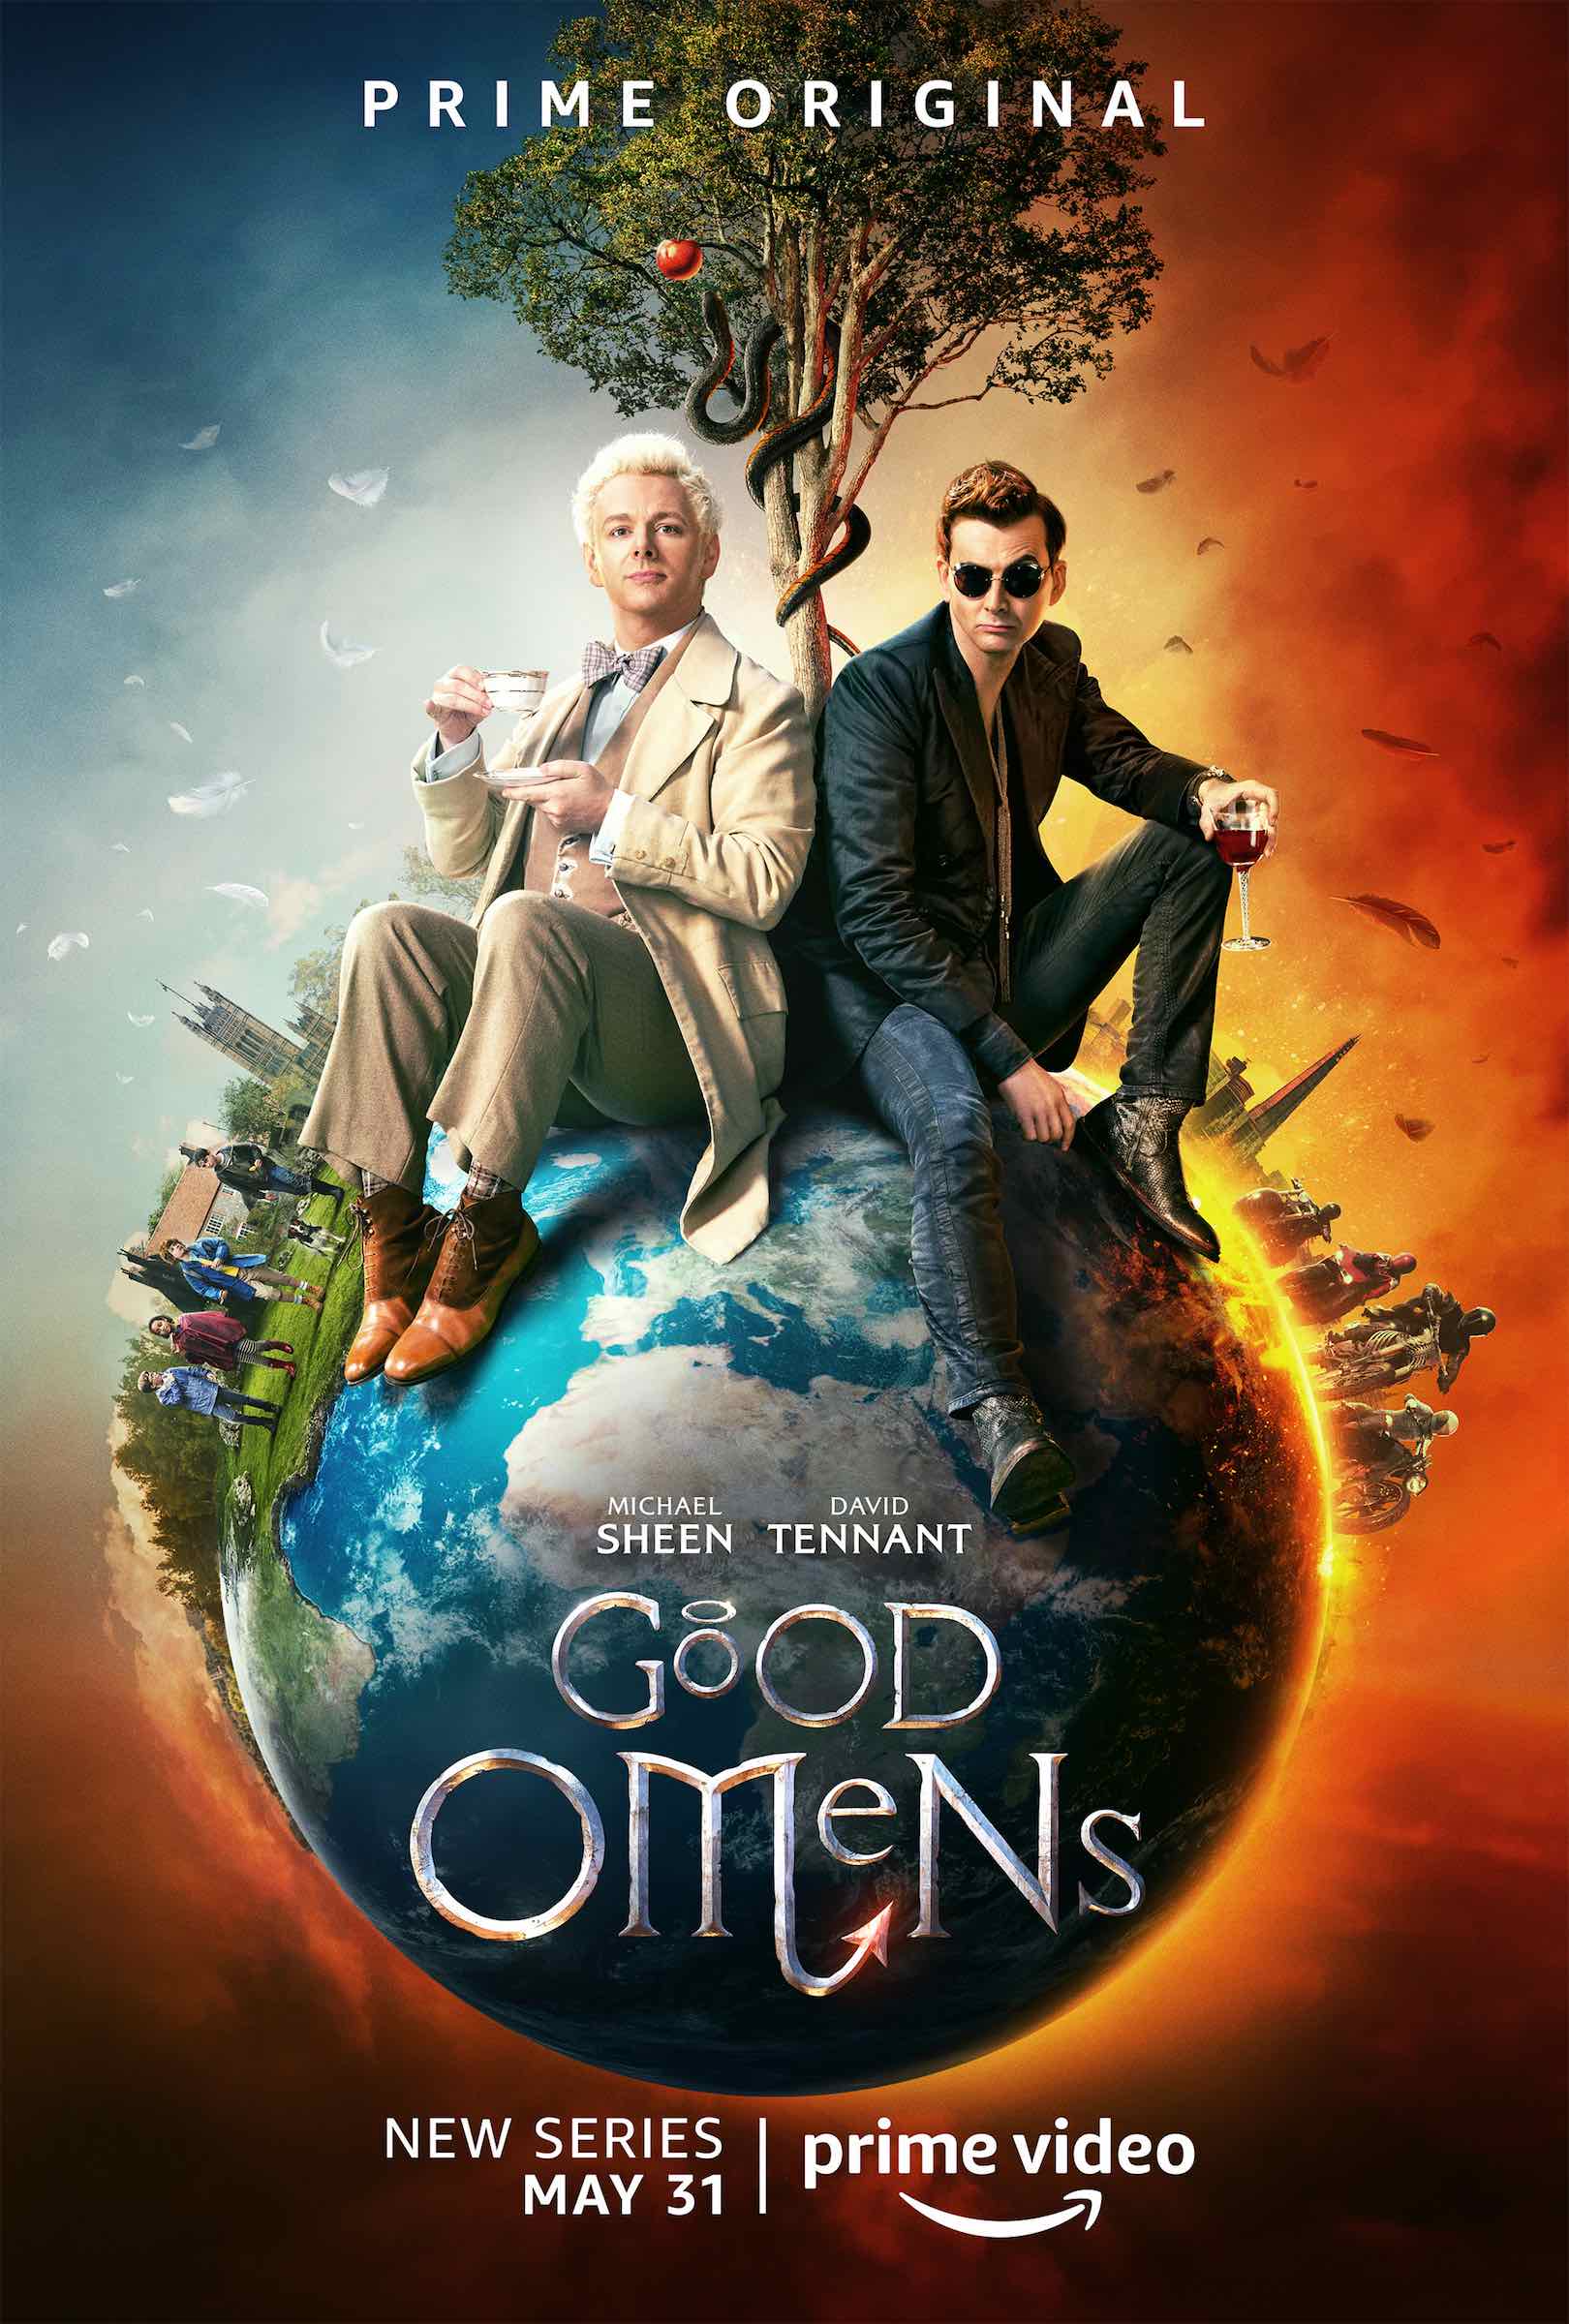 While fans wait to find out the future of 'Good Omens', we spoke to them about their opinions on the book, the show, and why it’s important.